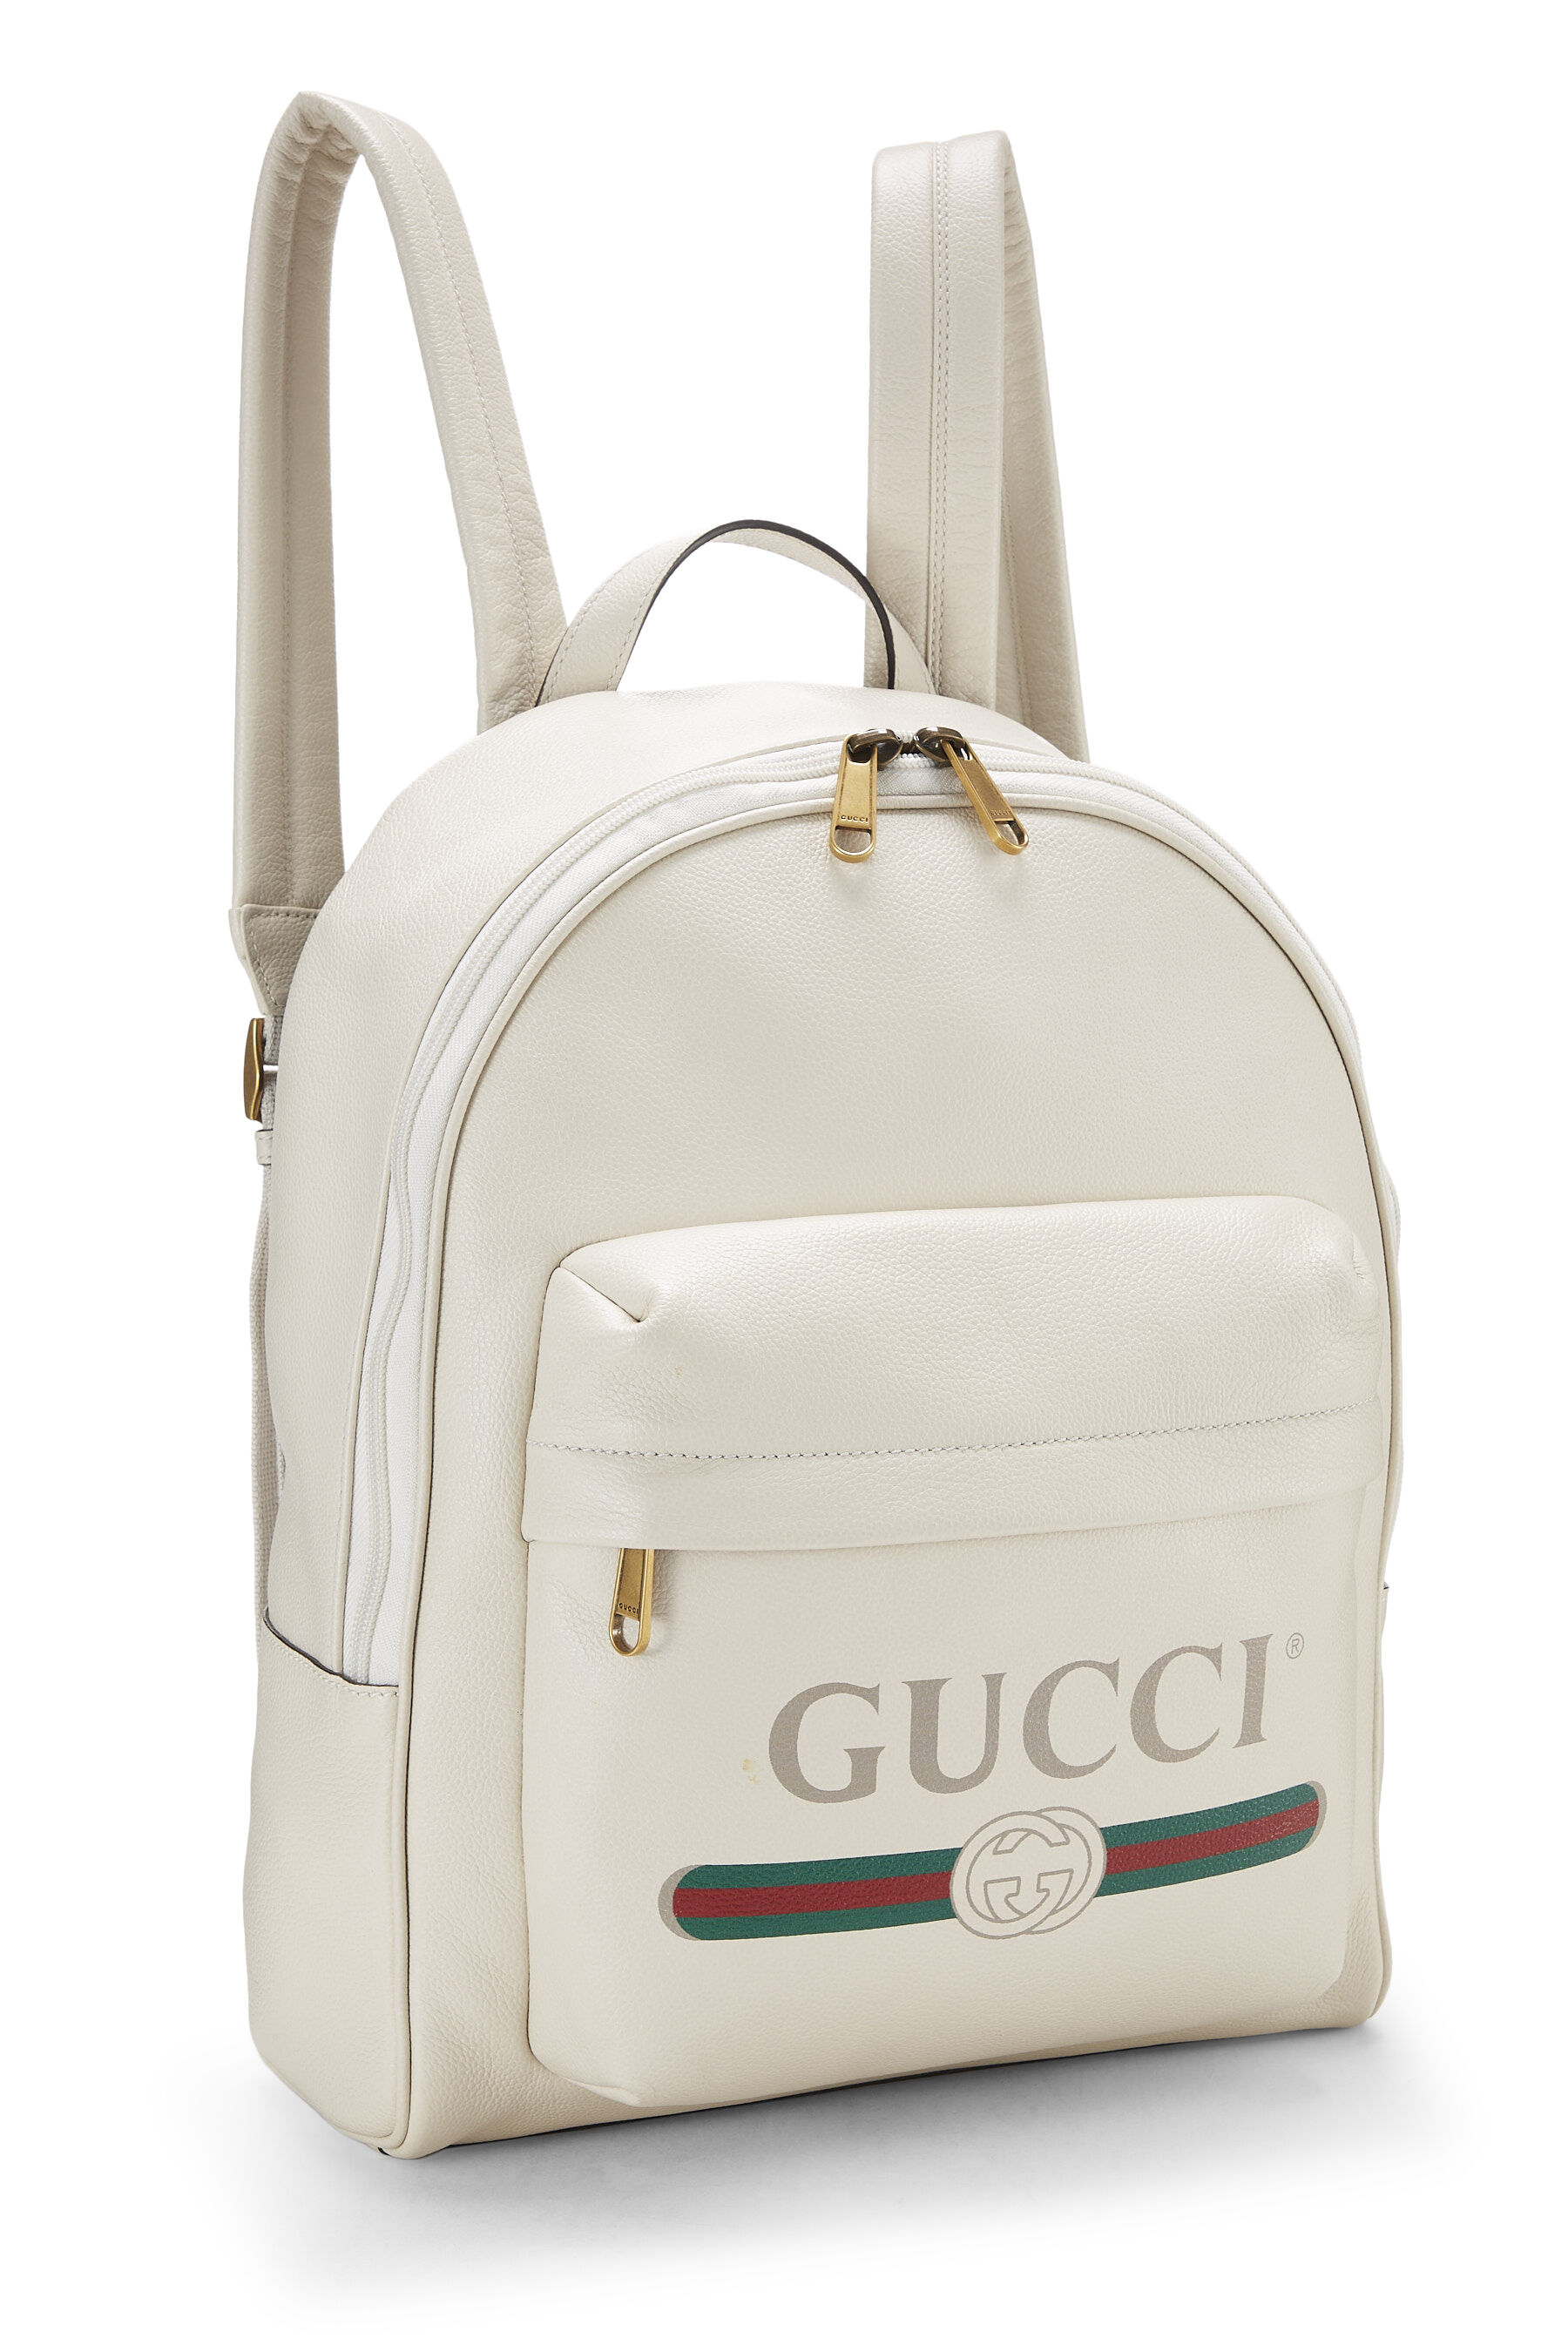 Gucci Ivory Leather Logo Day Backpack Gucci | The Luxury Closet